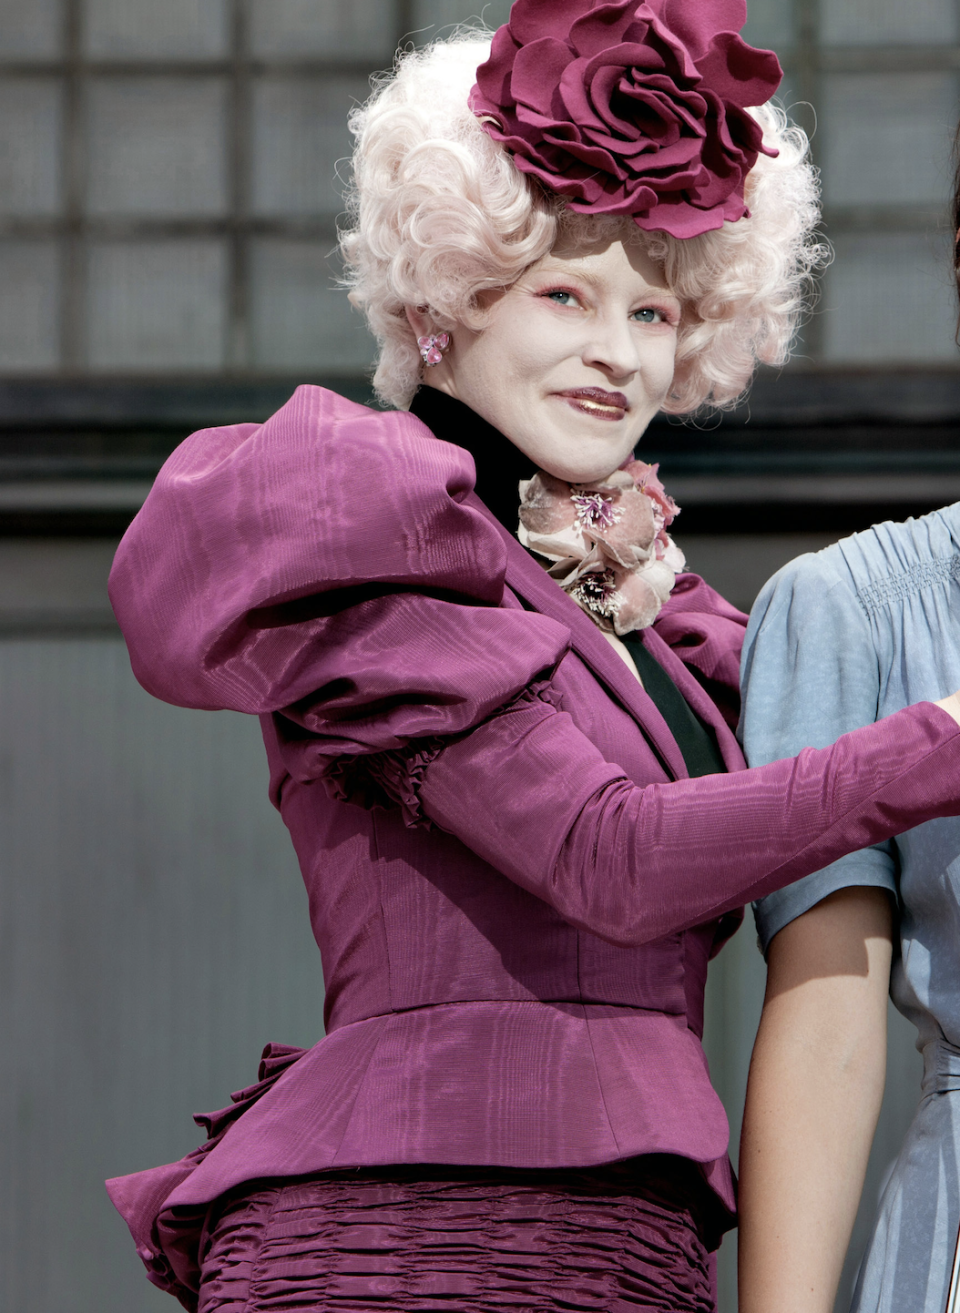 Effie Trinket from The Hunger Games, wearing a ruffled magenta dress with matching hat